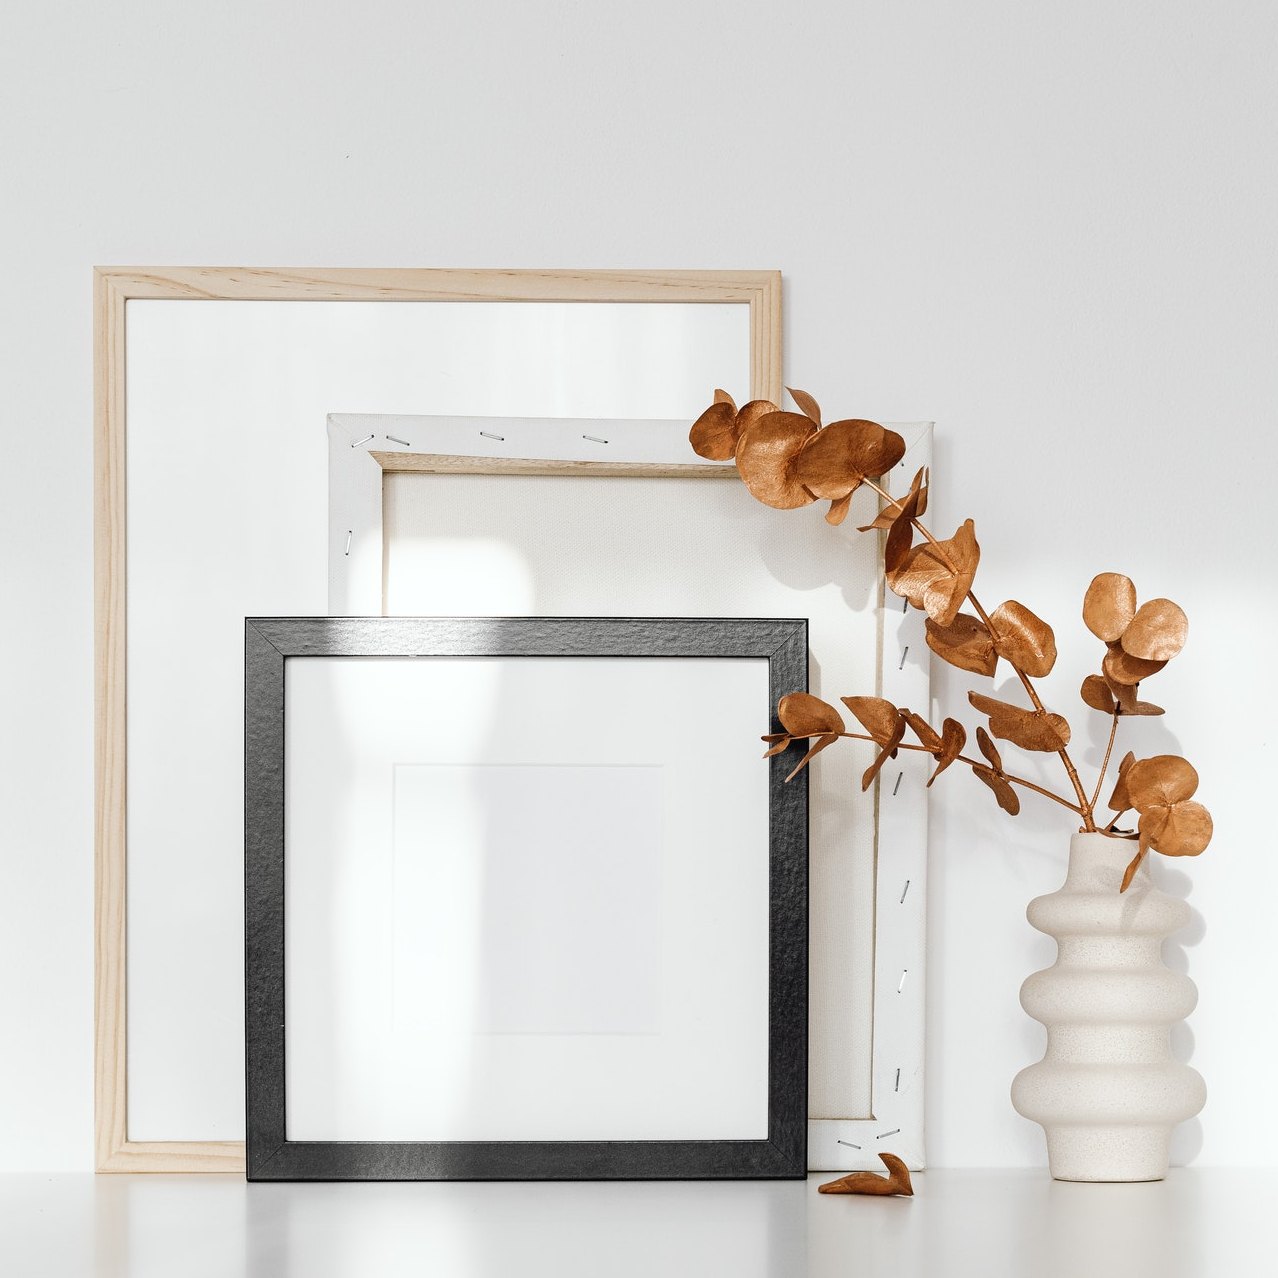 Less Is More: How to Pack Picture Frames Efficiently